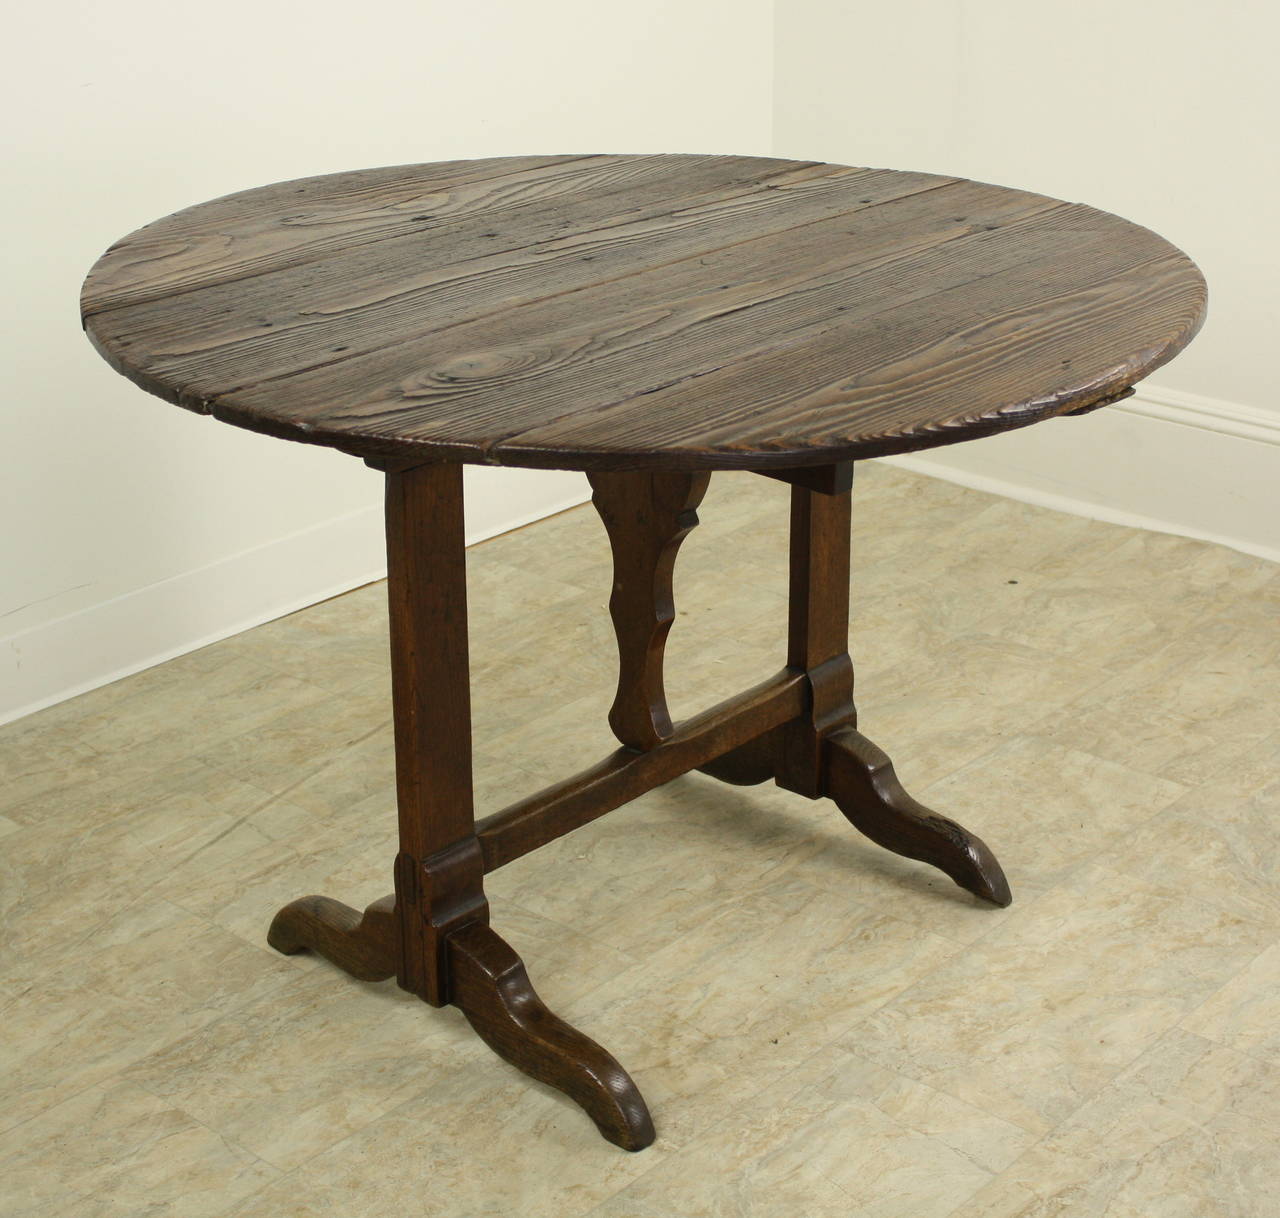 The pine graining on this very good vendange wine tasting table is quite wonderful.  The swivel table base is easy to use and is sturdy. The table can be stored upright if required, but would be a great center table or side table. Very nicely shaped